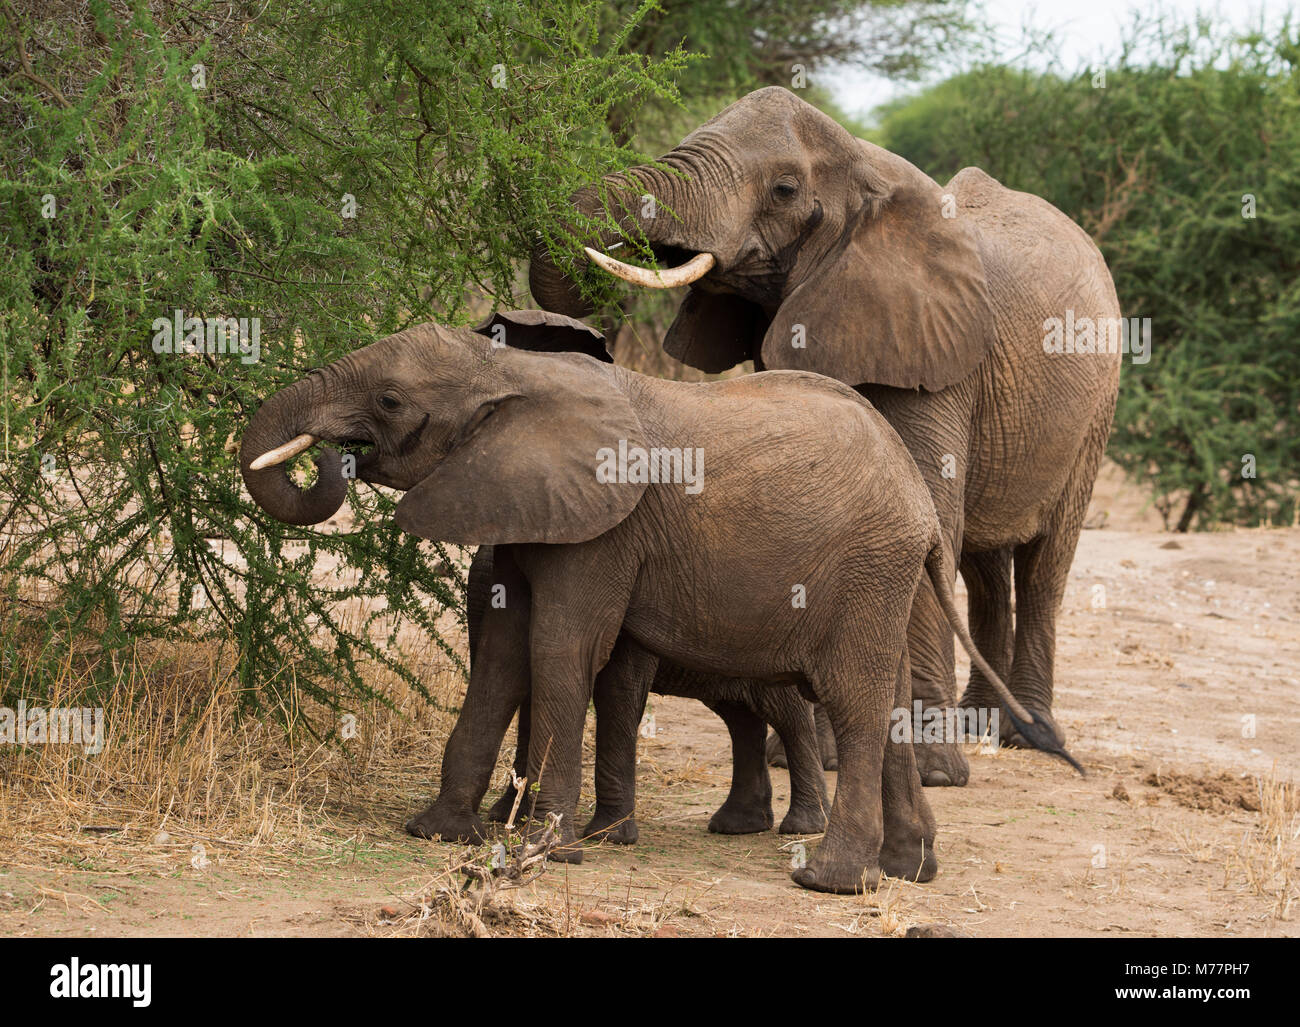 Young elephants and their mother (Loxondonta africana) eating acacia leaves in Tarangire National Park Tanzania, East Africa, Africa Stock Photo